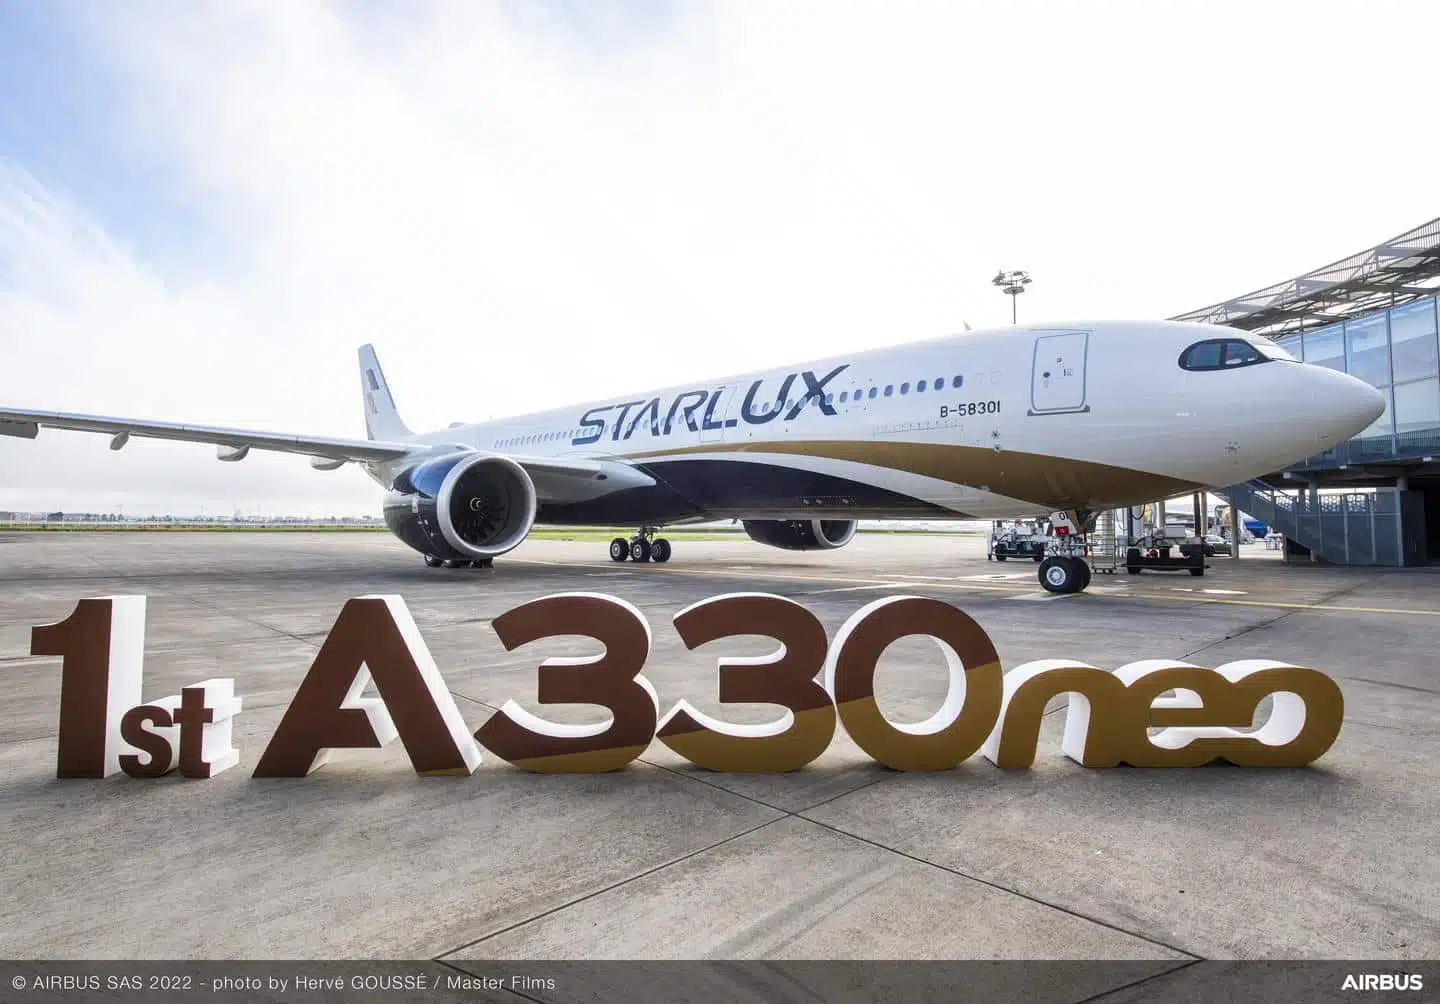 STARLUX launches widebody fleet with first A330neo